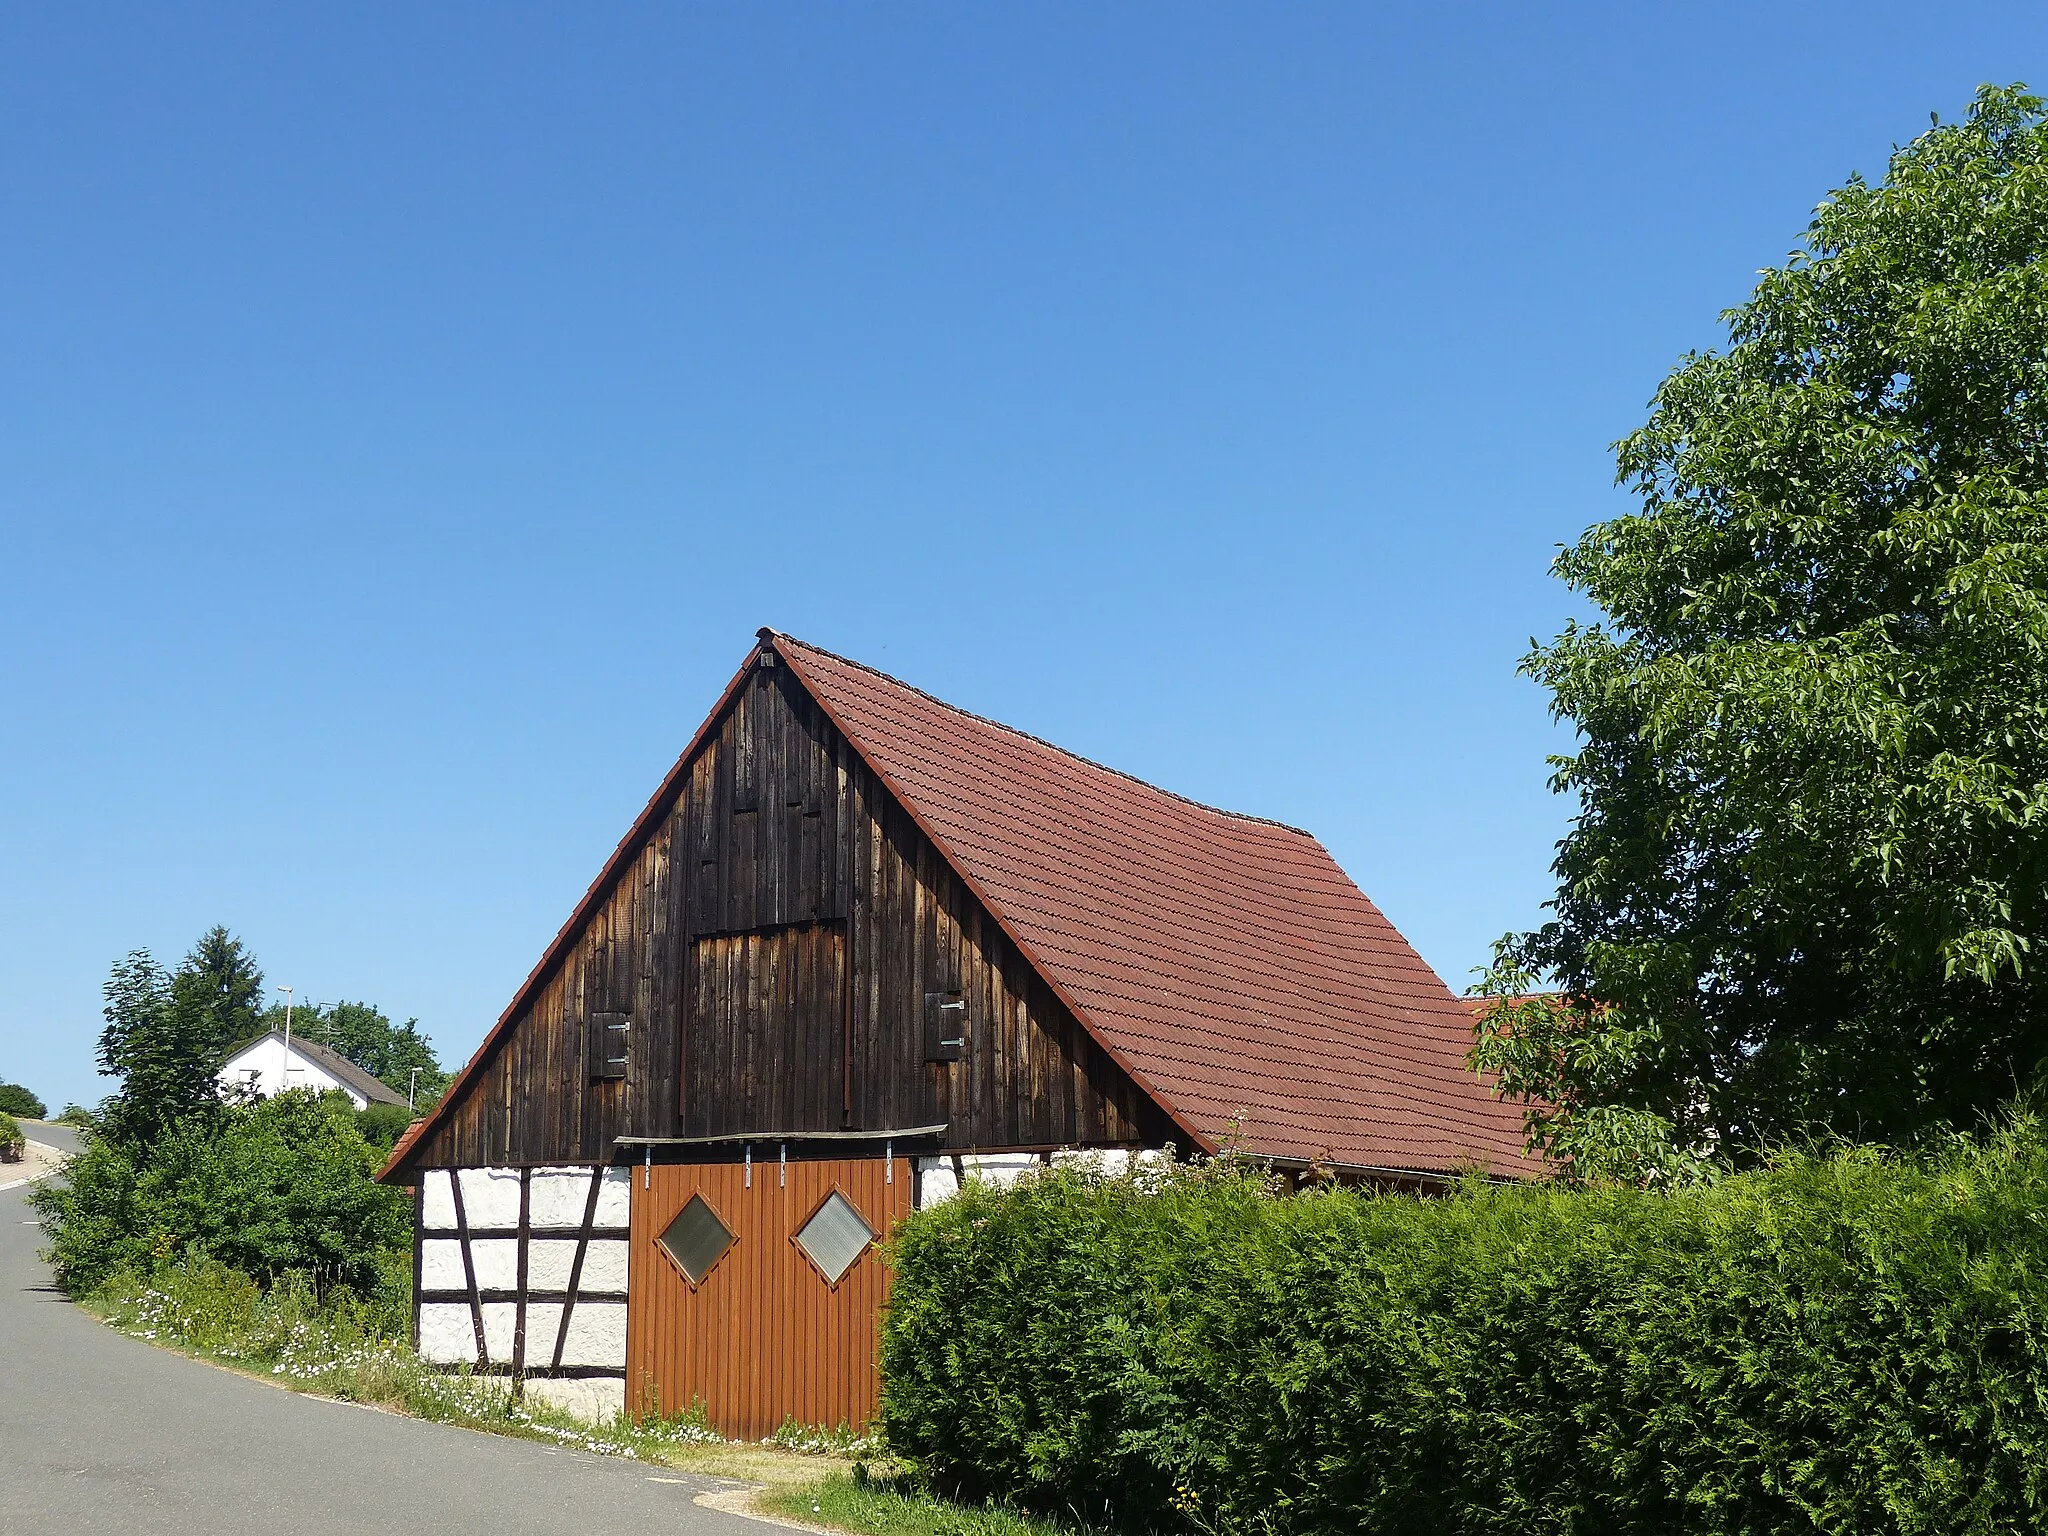 Photo showing: The hamlet Lettenmühle, a district of the municipality of Igensdorf